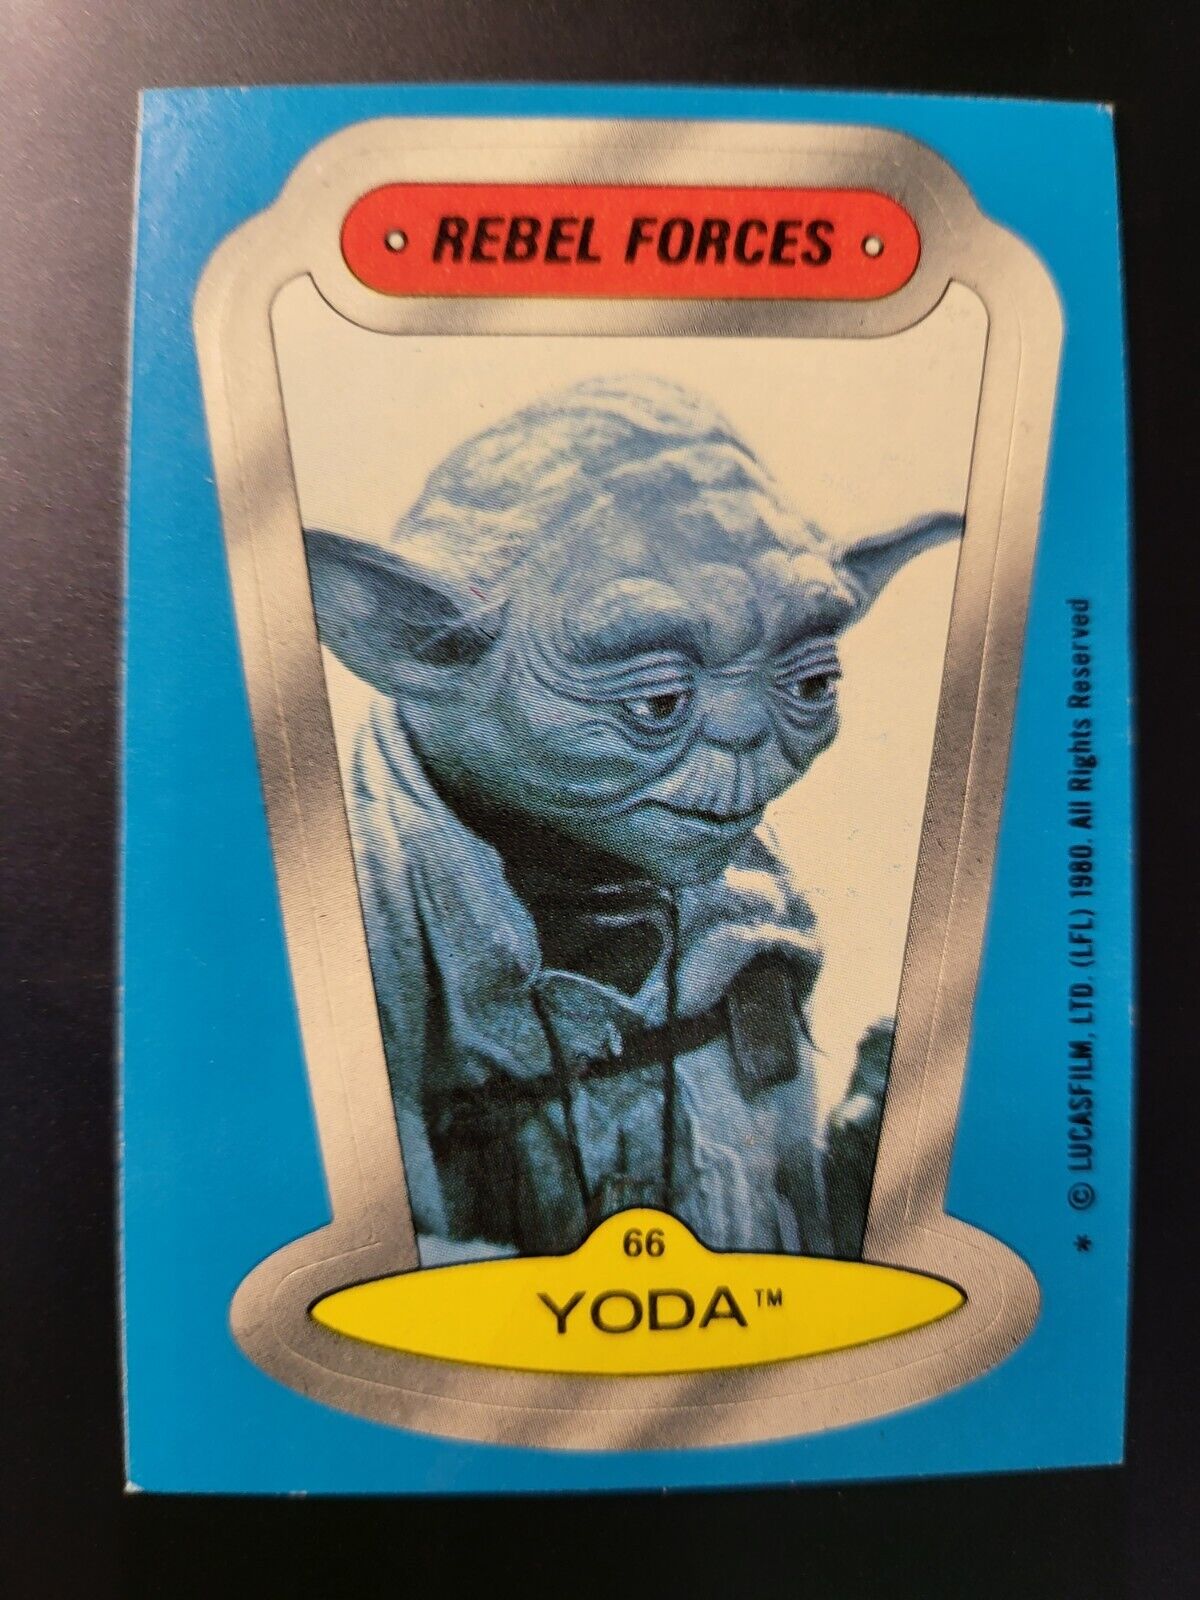 1980 Topps The Empire Strikes Yoda RC Rebel Forces Sticker Card #66